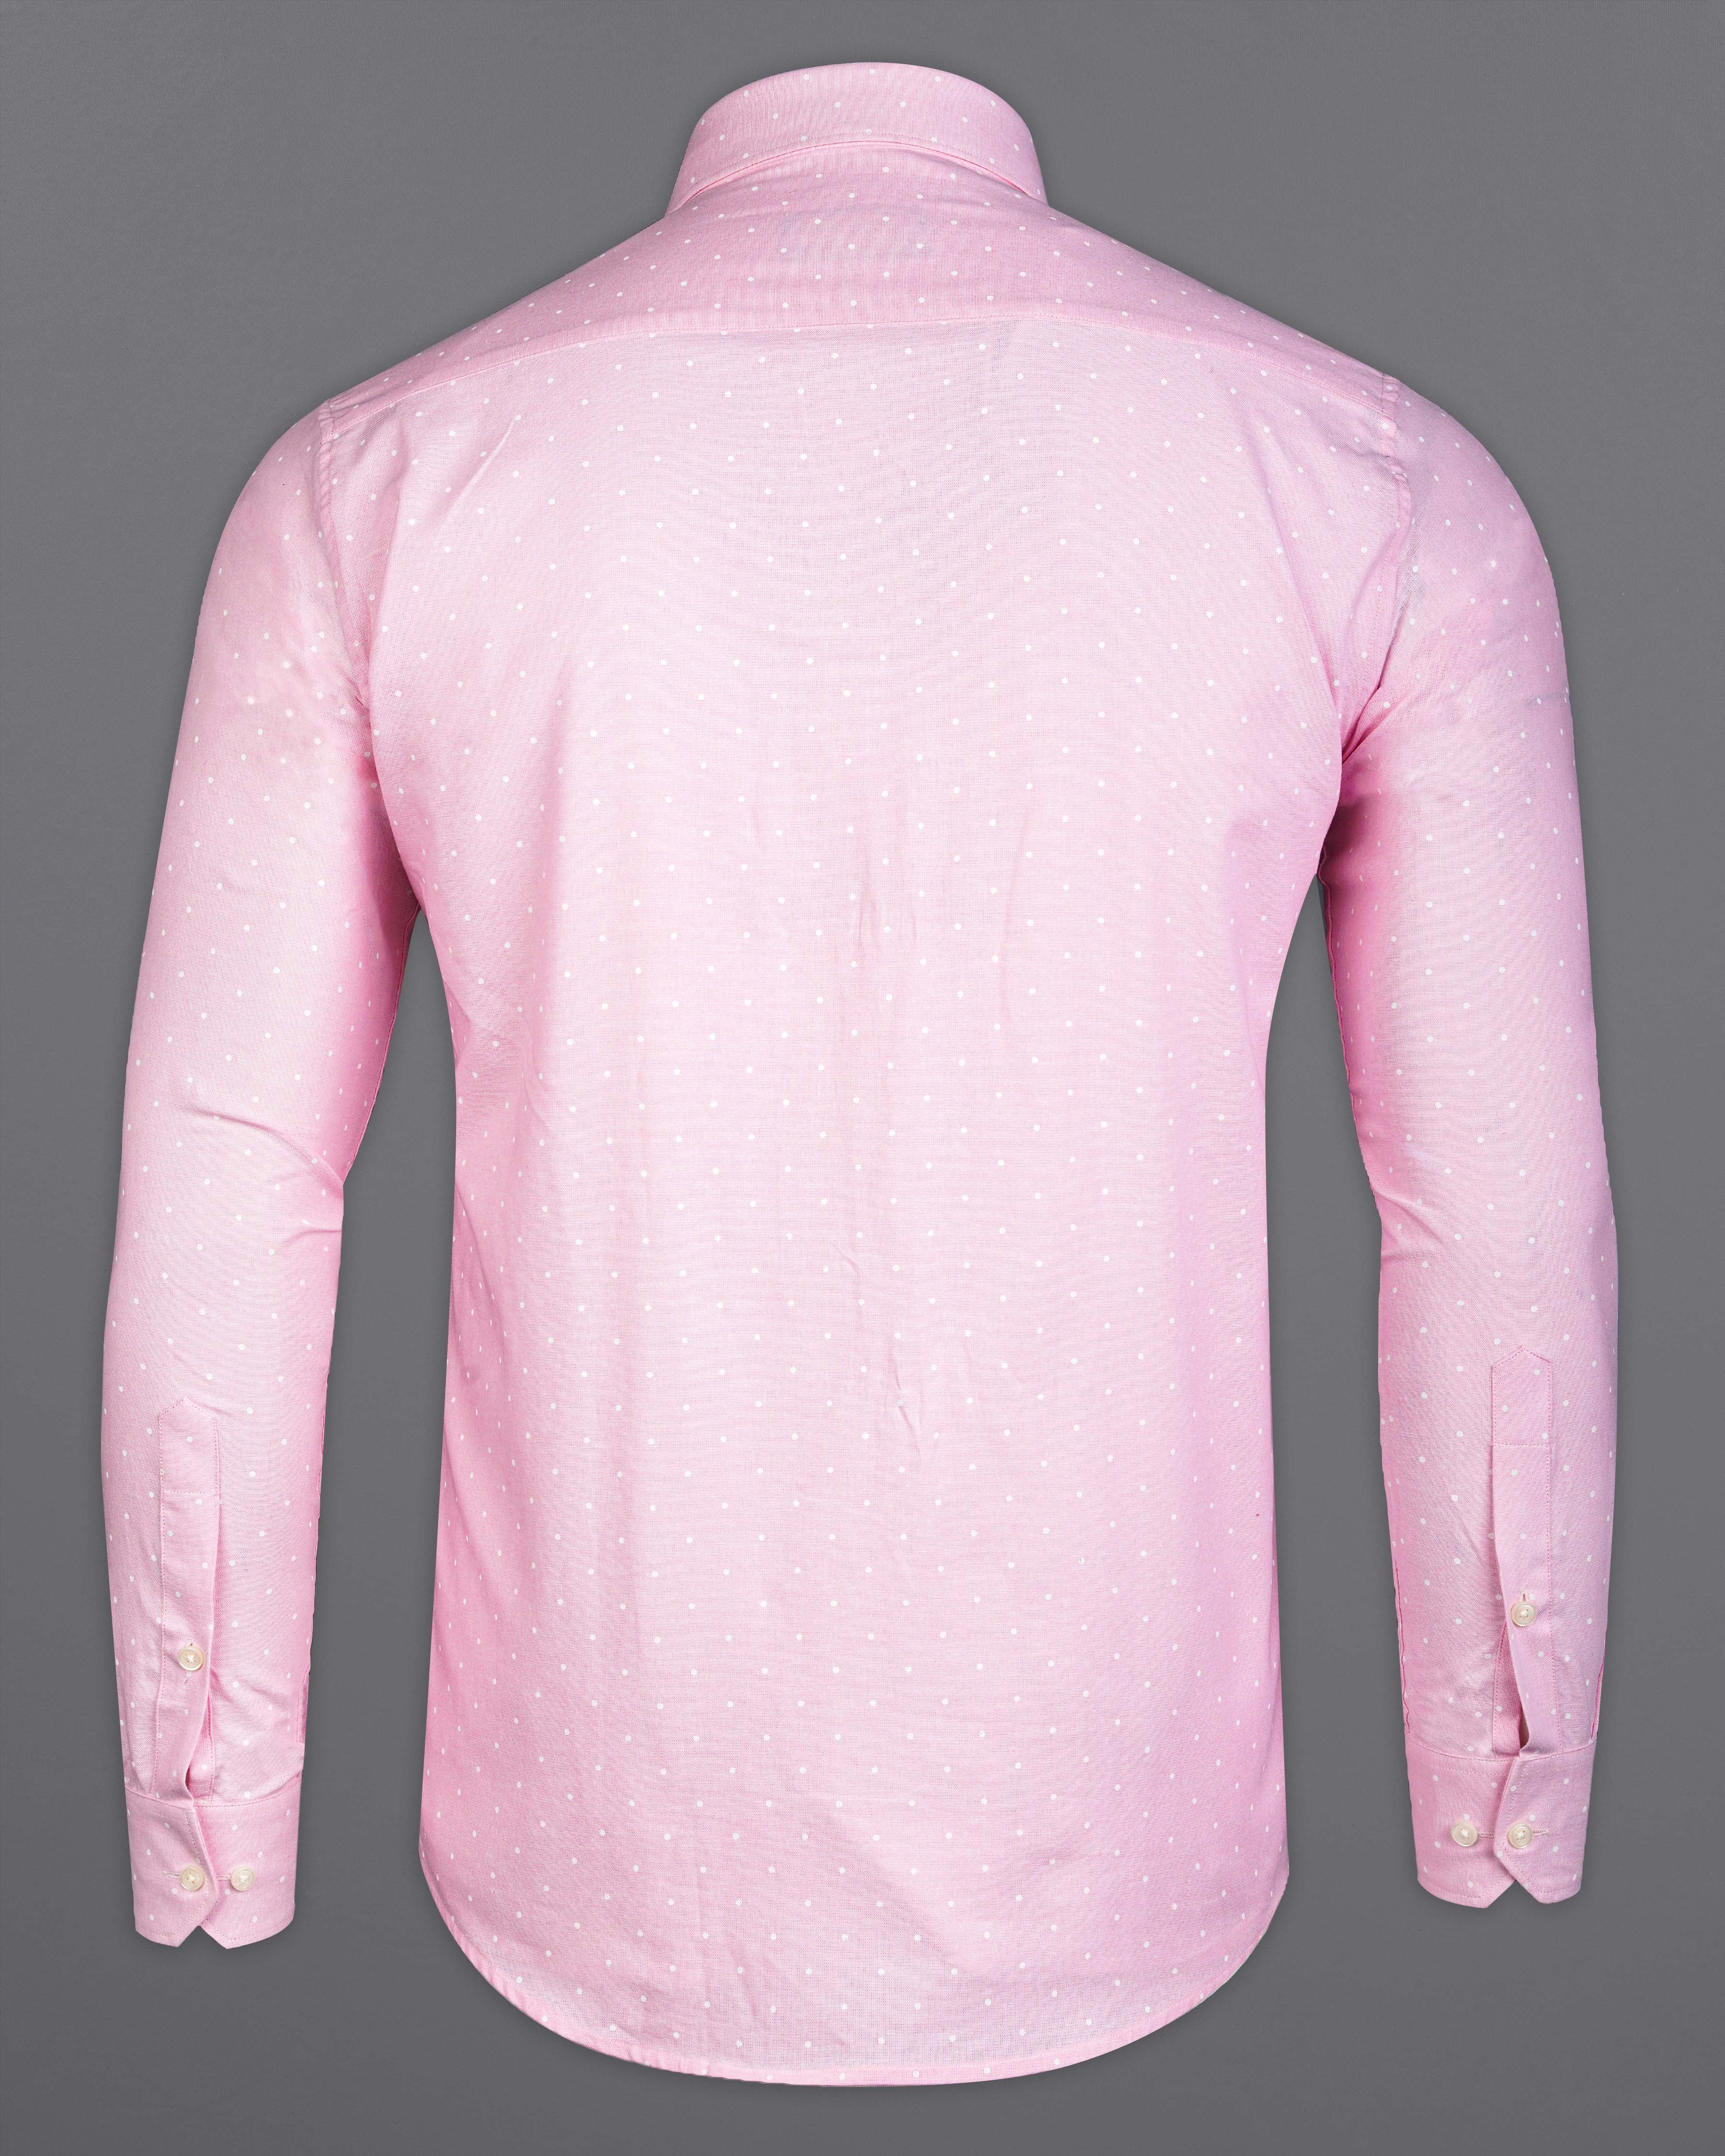 Carousel Pink and White Textured Luxurious Linen Shirt 9868-CA-38, 9868-CA-H-38, 9868-CA-39, 9868-CA-H-39, 9868-CA-40, 9868-CA-H-40, 9868-CA-42, 9868-CA-H-42, 9868-CA-44, 9868-CA-H-44, 9868-CA-46, 9868-CA-H-46, 9868-CA-48, 9868-CA-H-48, 9868-CA-50, 9868-CA-H-50, 9868-CA-52, 9868-CA-H-52